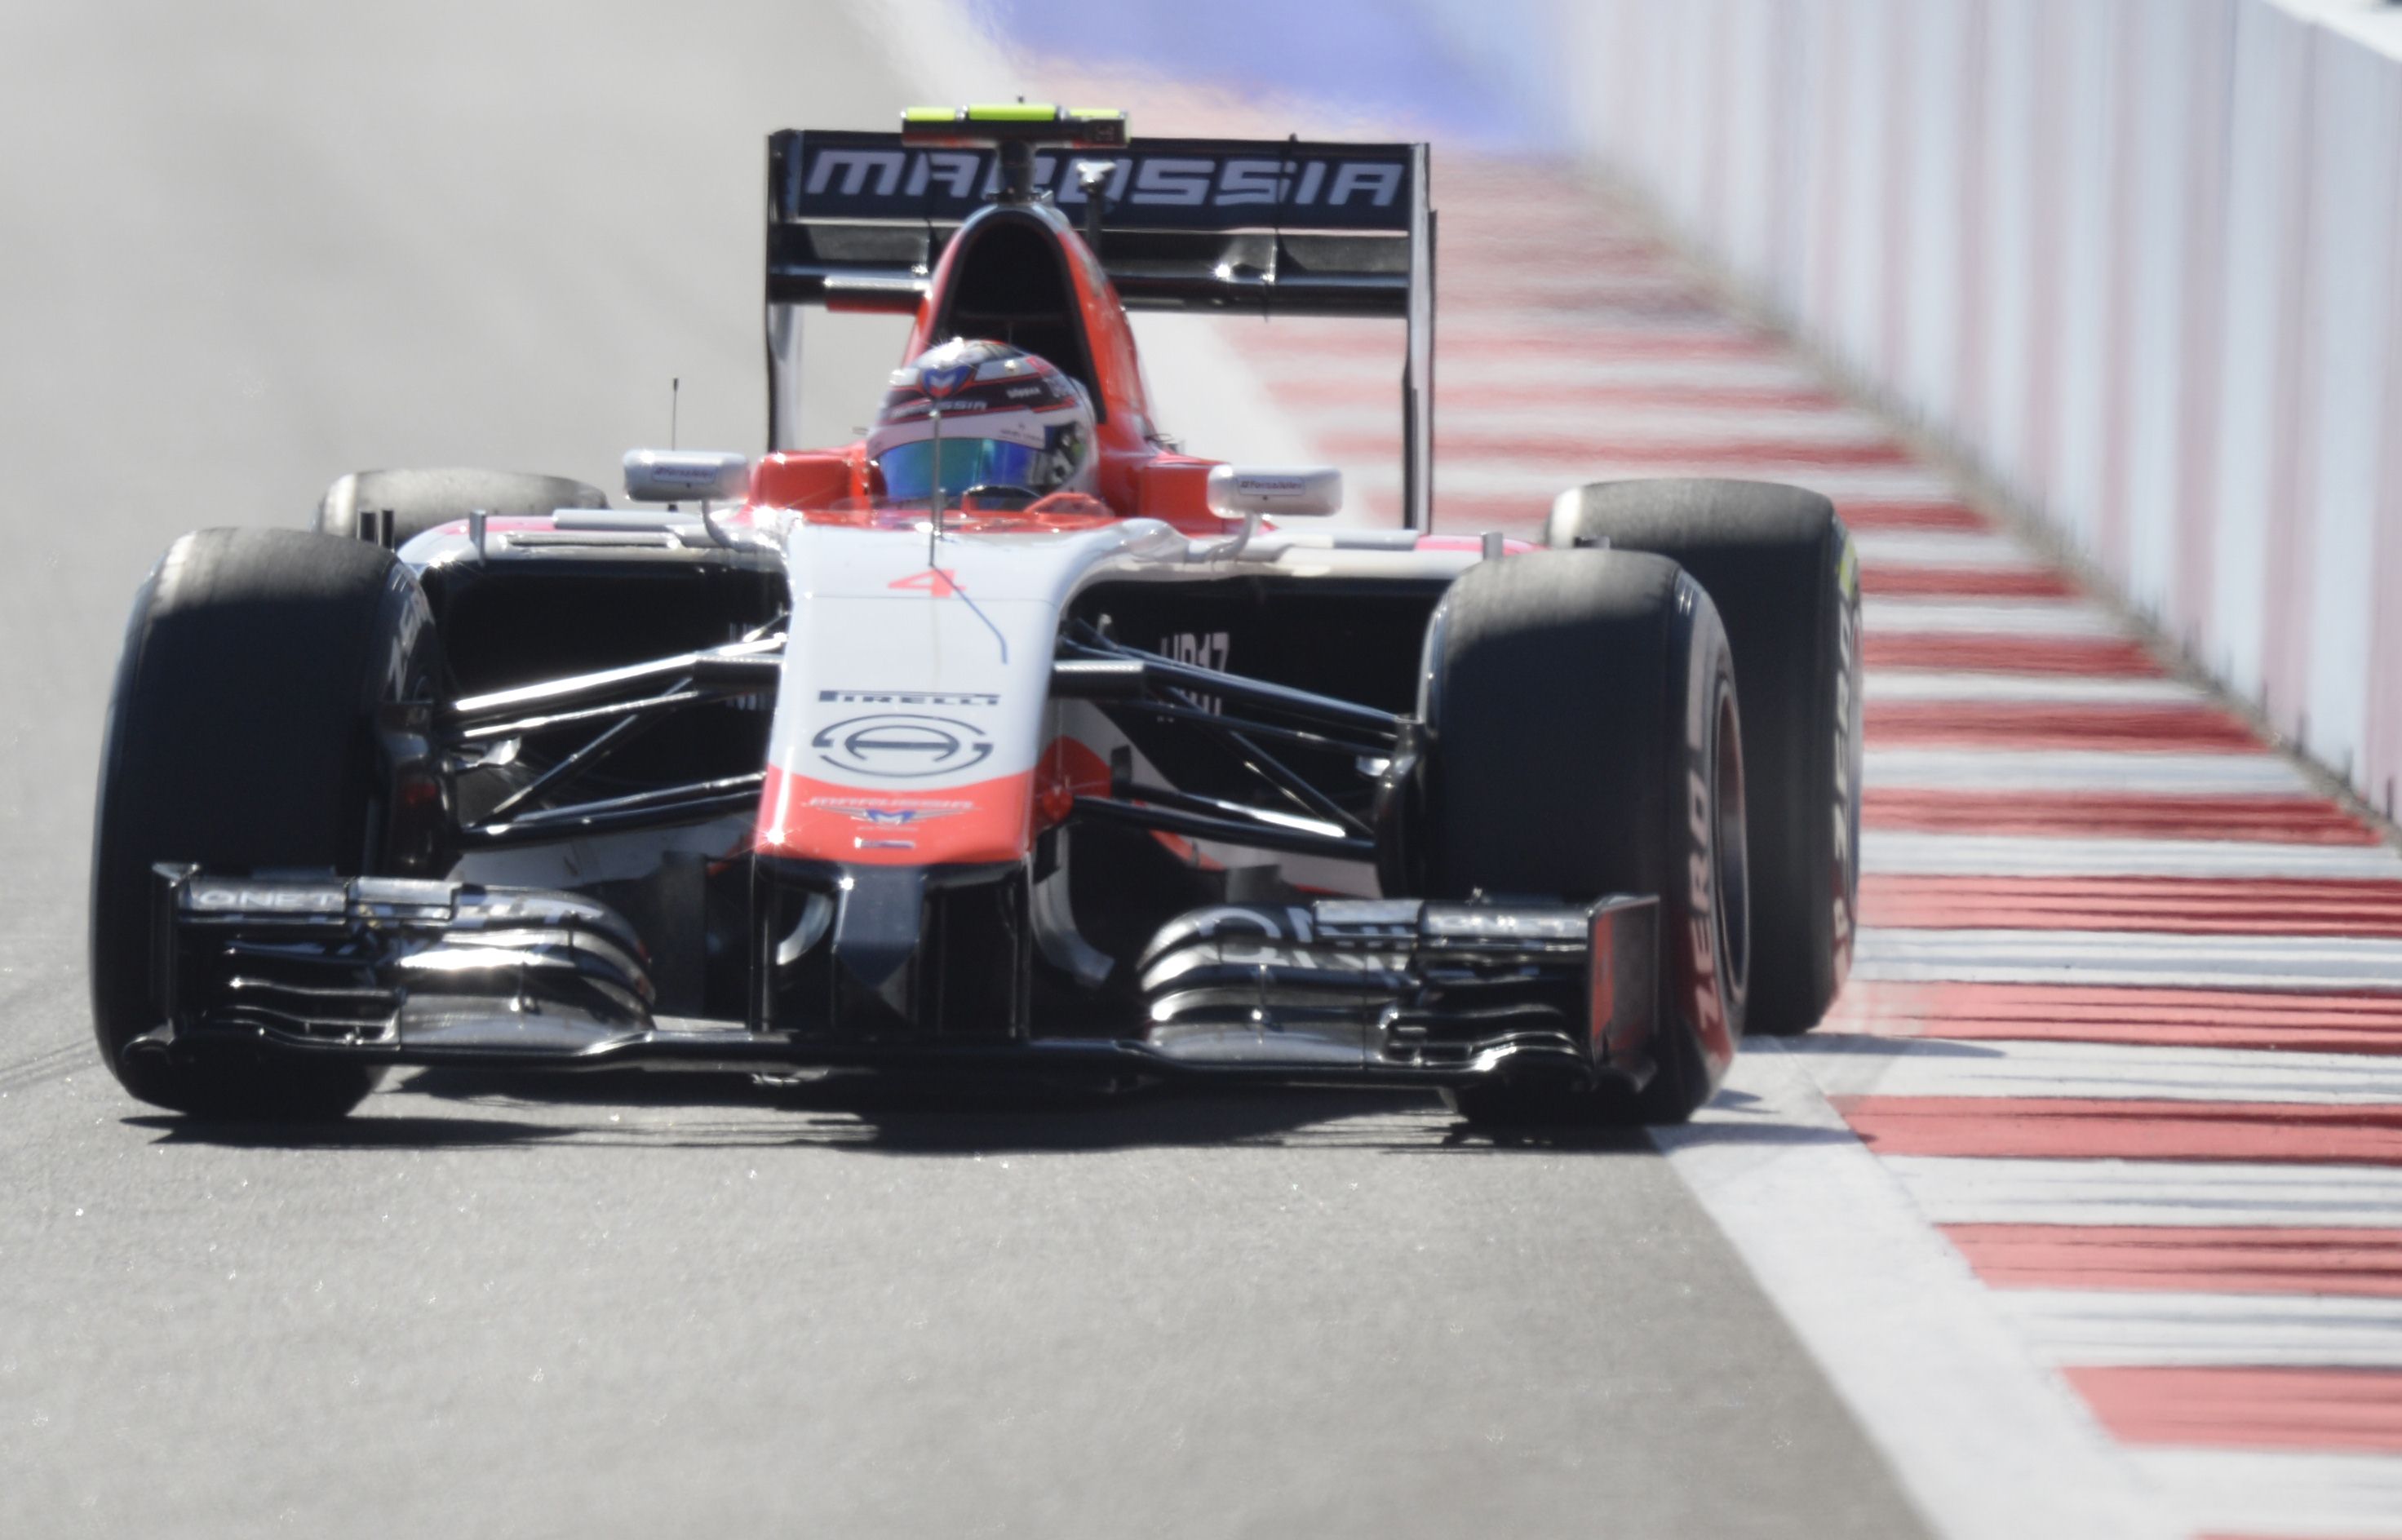 British driver Max Chilton in a free practice session at Sochi for the Marussia F1 team, which administrators shut down on Friday. Photo: AFP